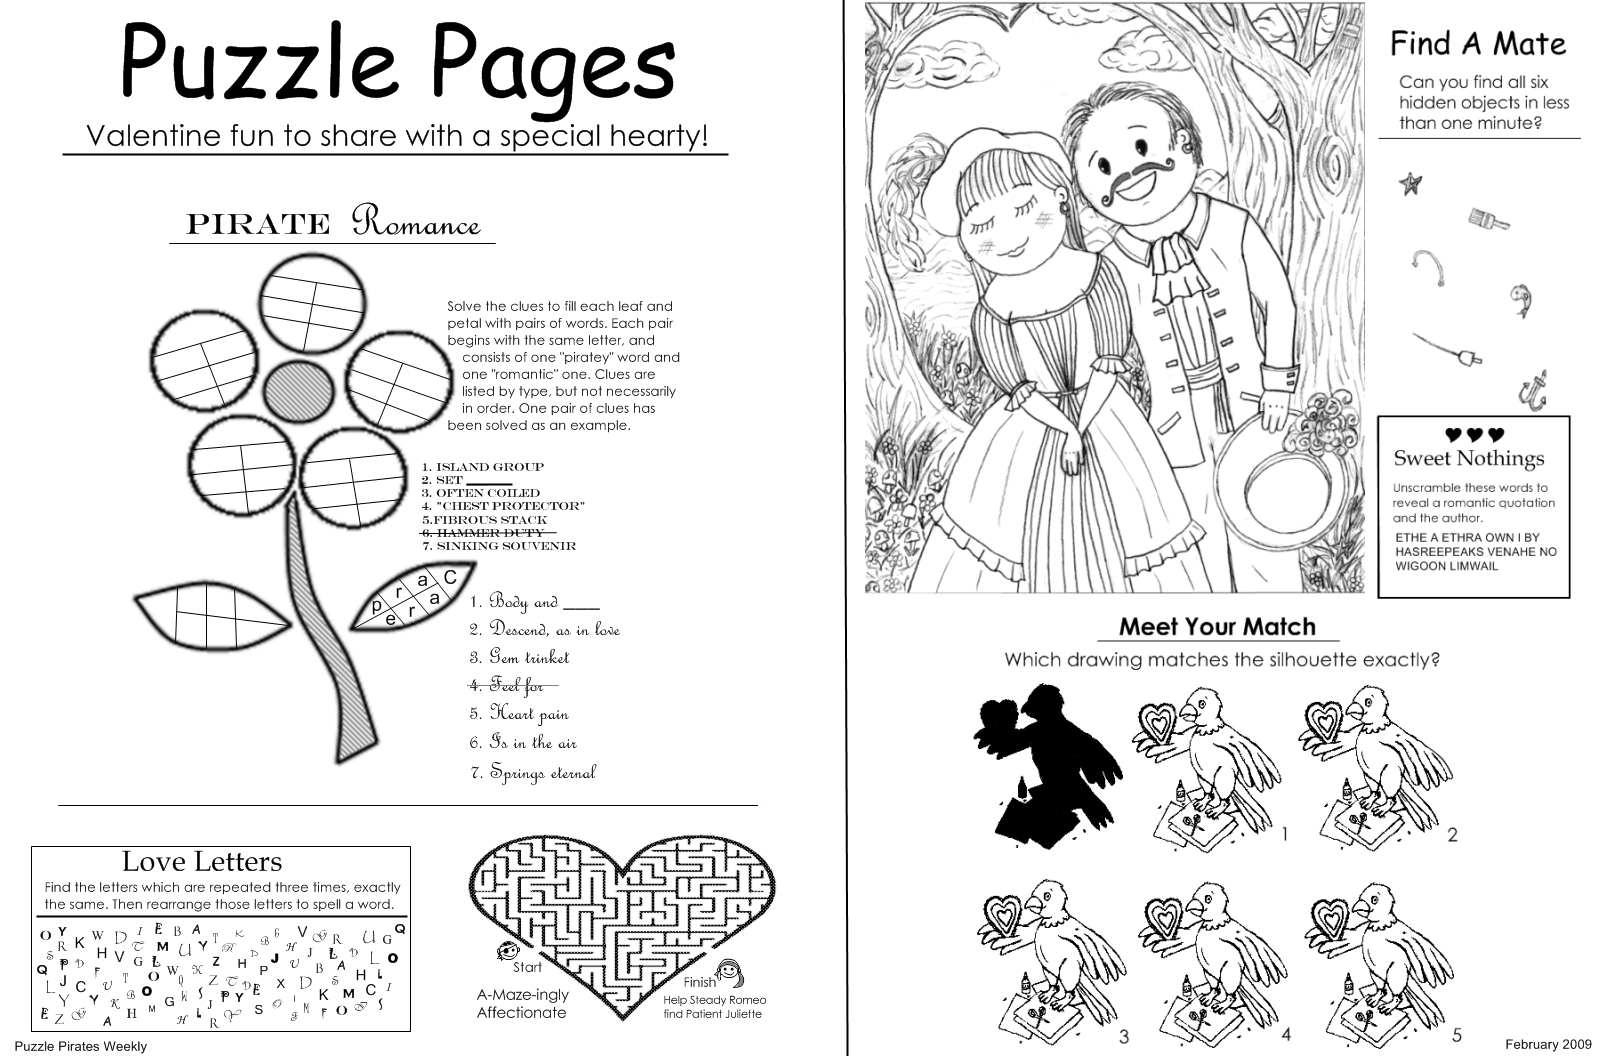 puzzlepages.jpg